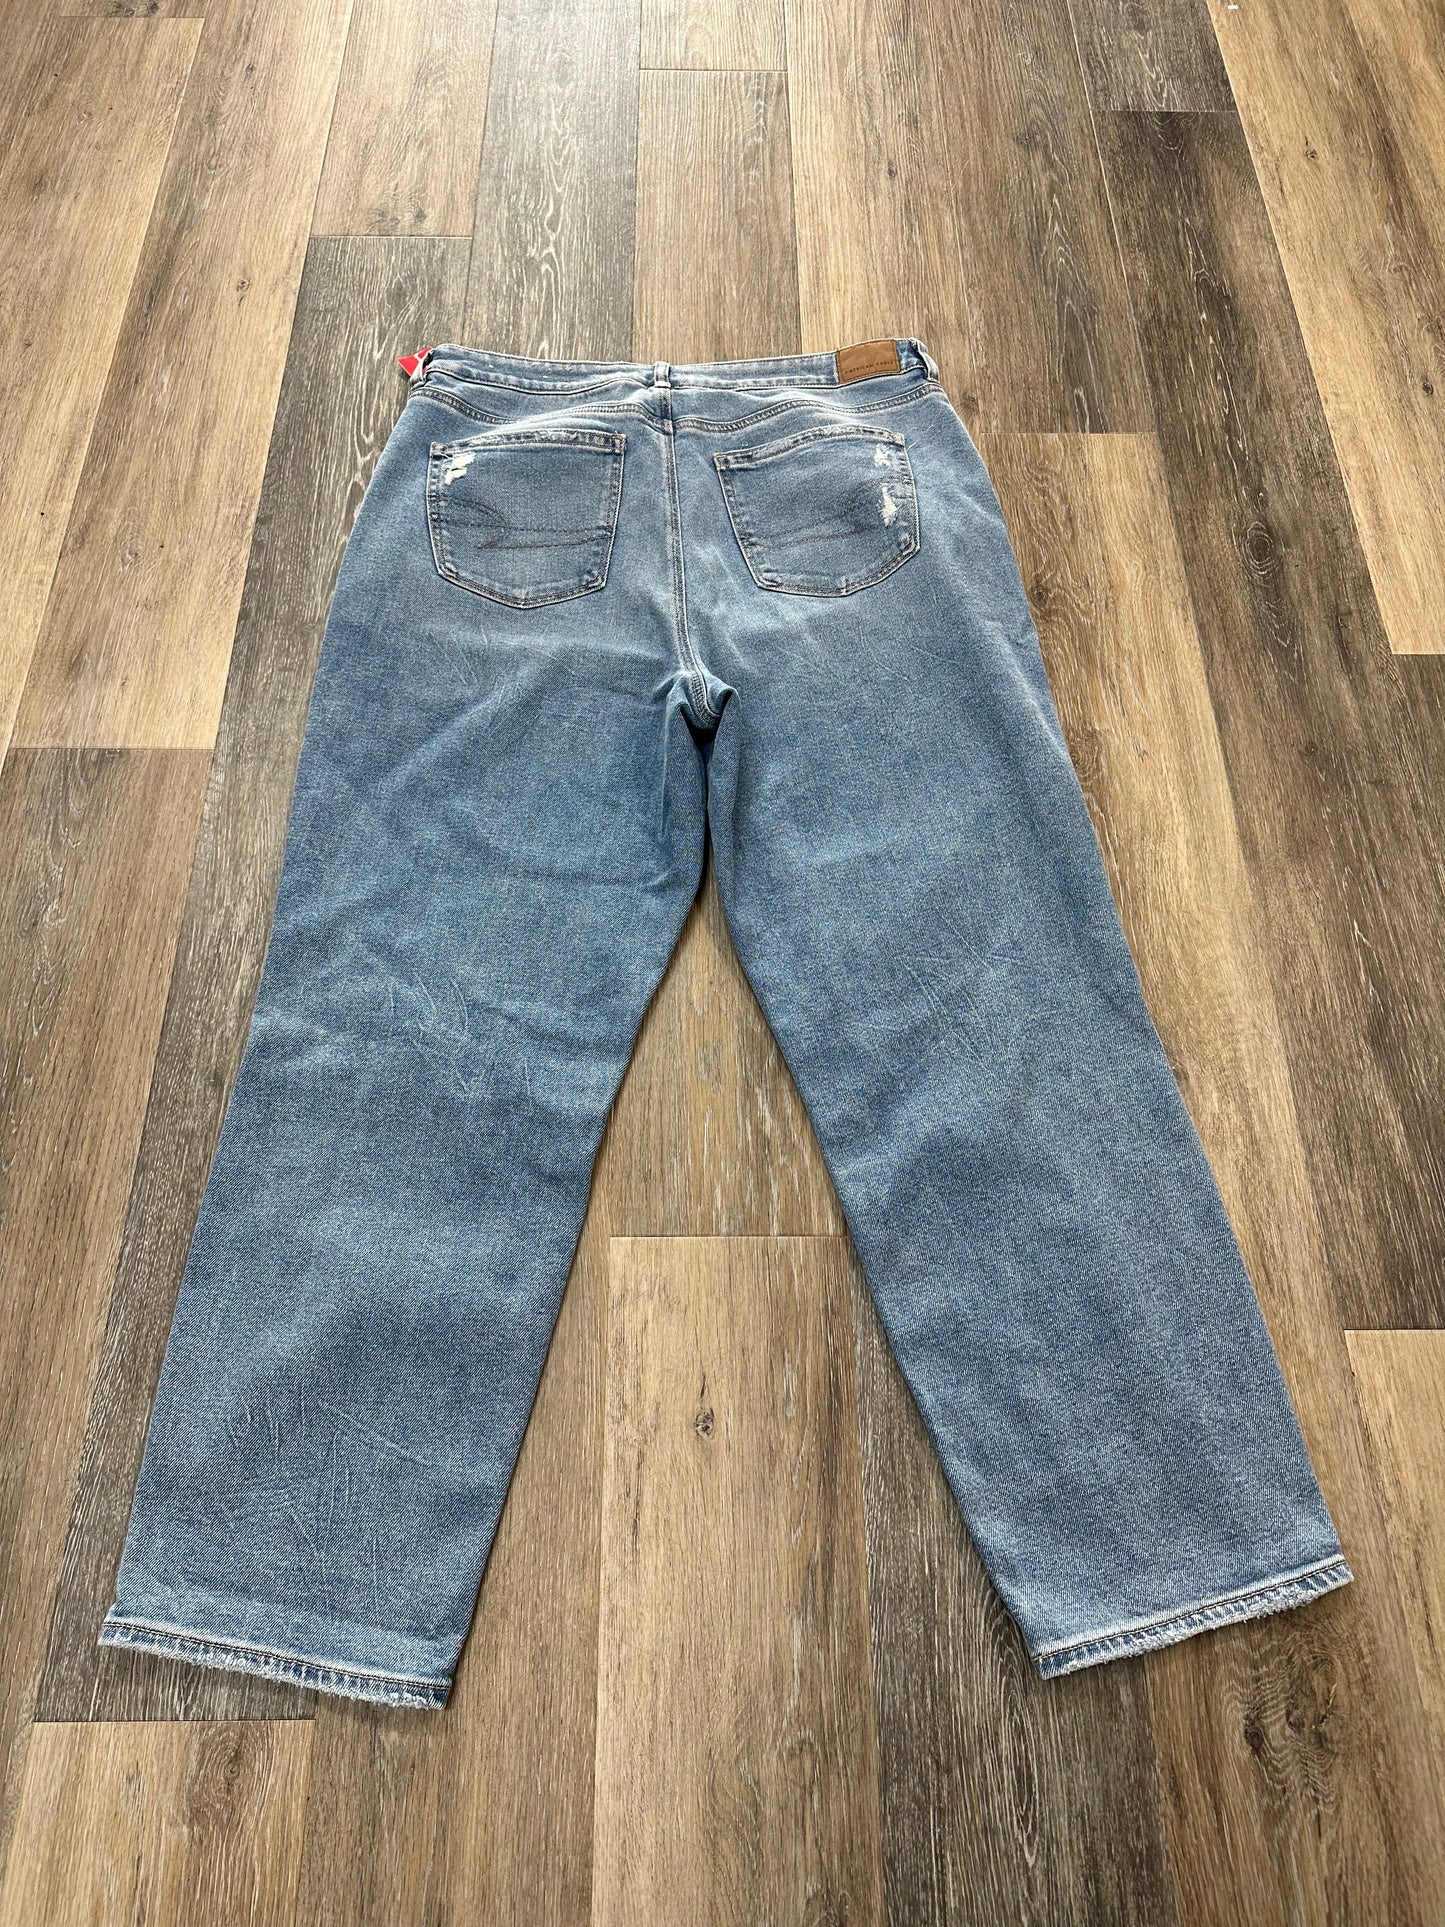 Jeans Straight By American Eagle  Size: 16